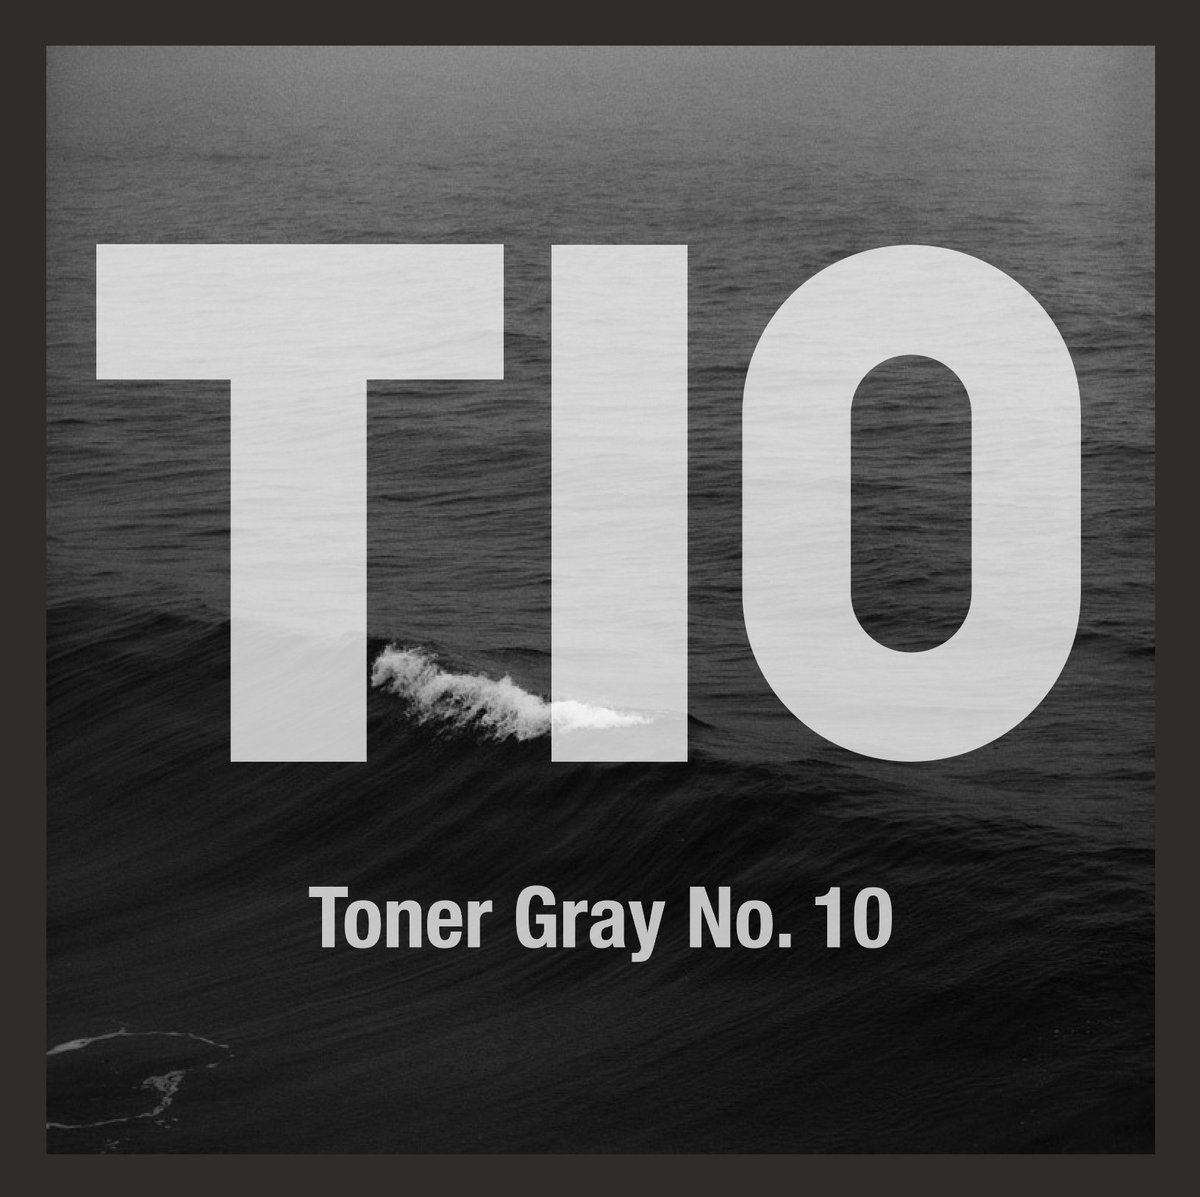 T10- Toner Gray No.10 The Toner Gray spectrum spans from T-0 to T-10, with T-10 representing the deepest and darkest shade within this range!